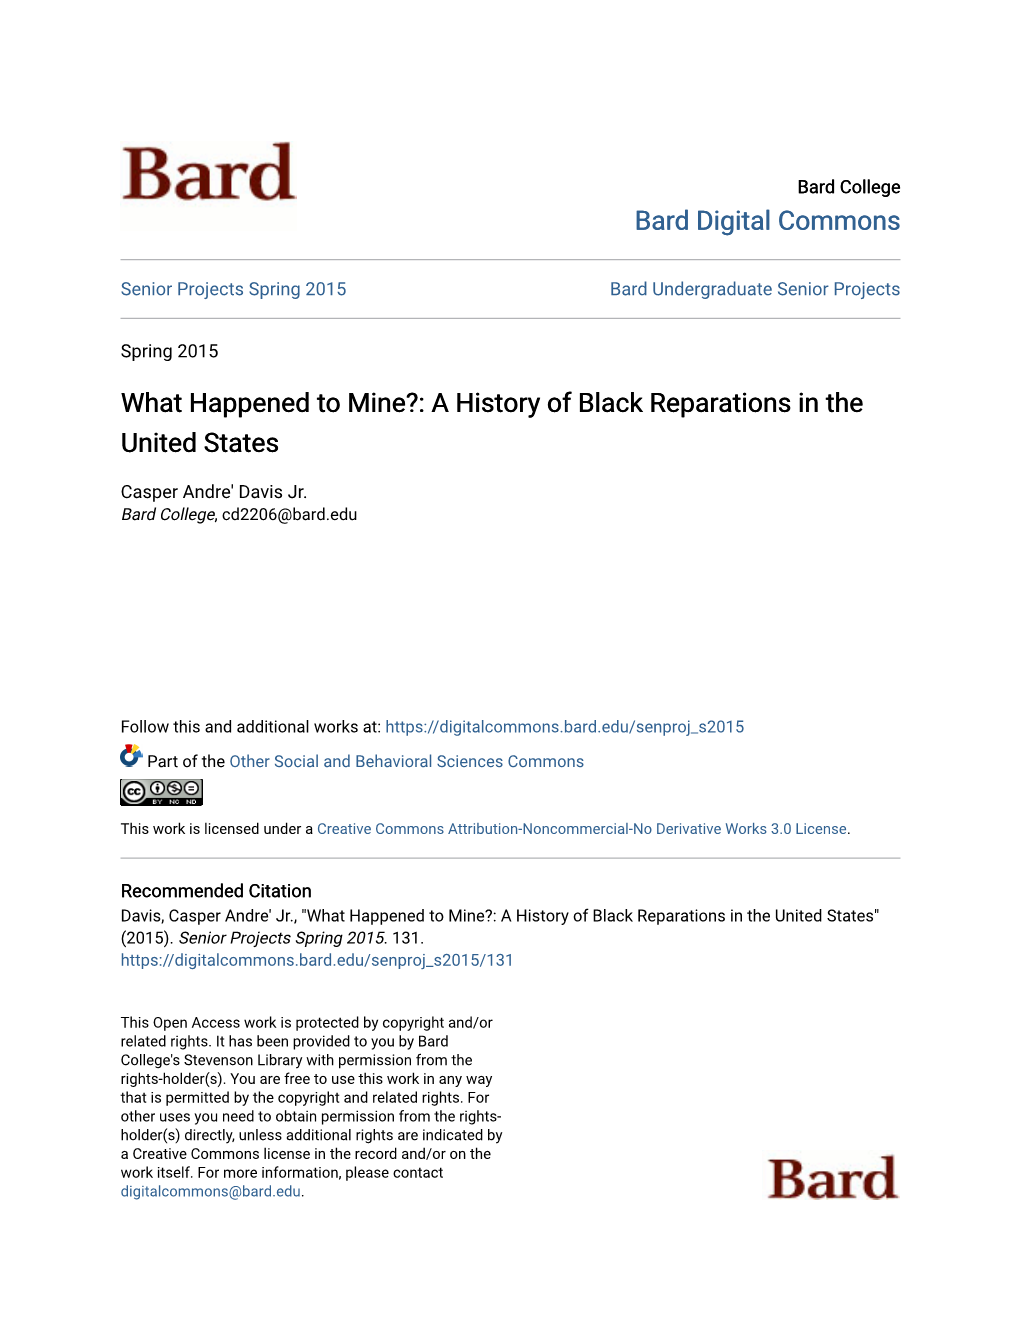 A History of Black Reparations in the United States